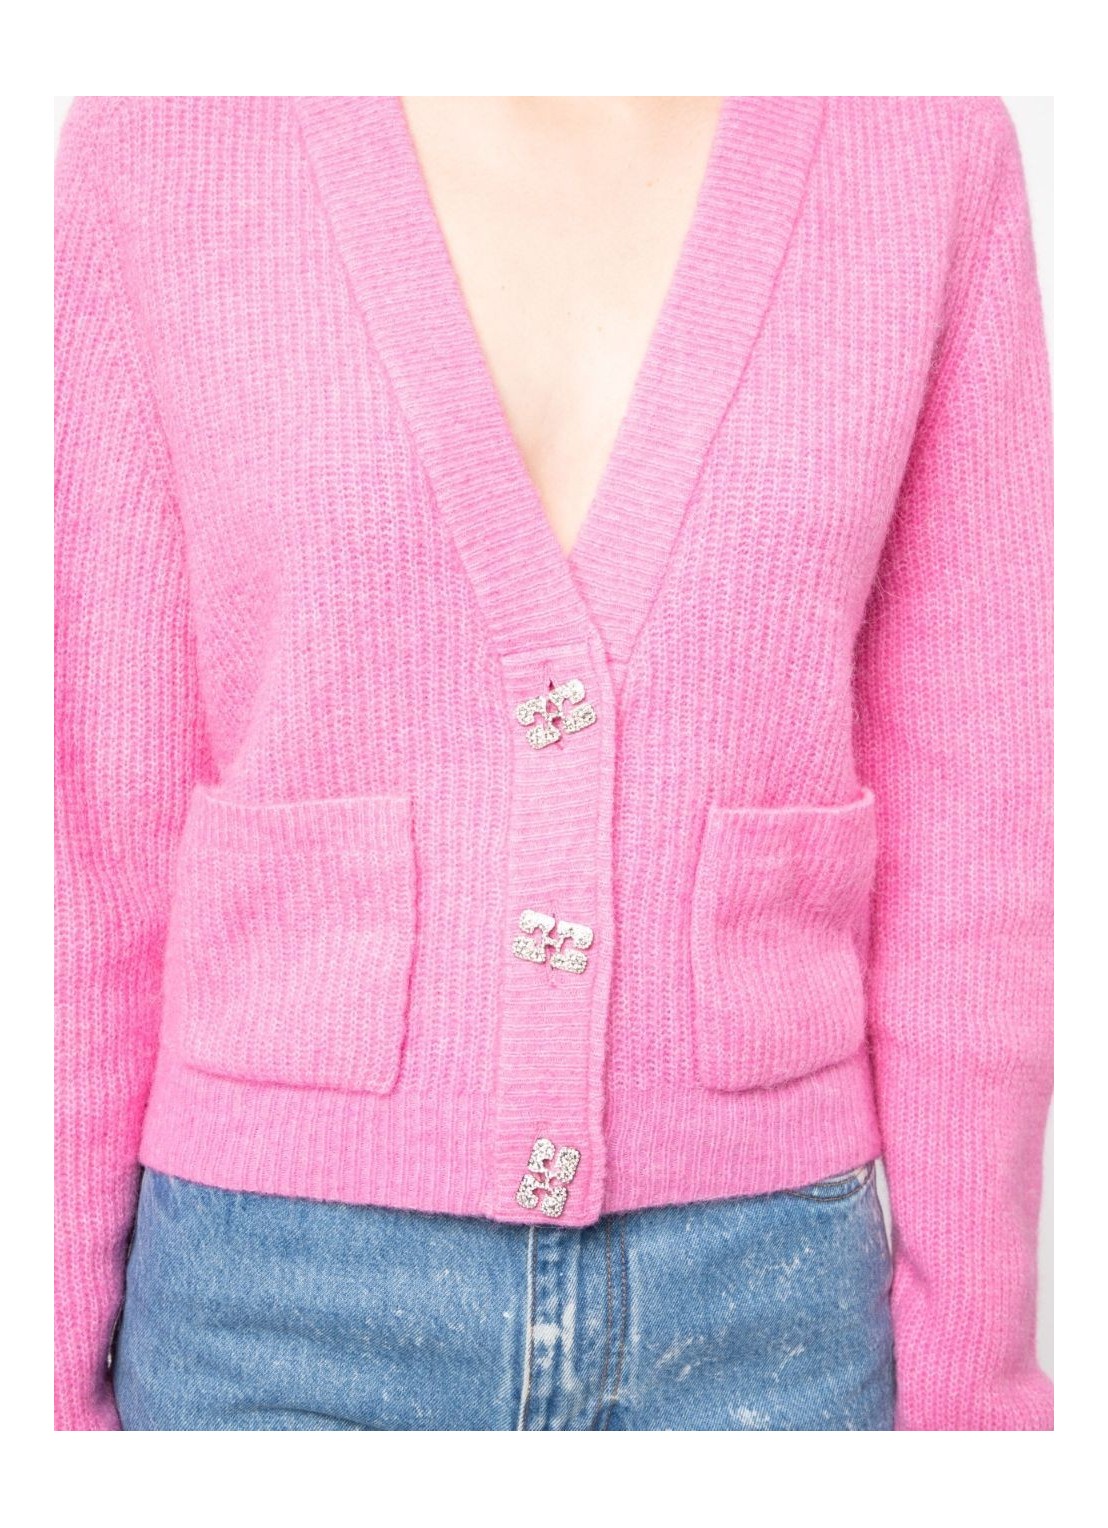 BNWOT] NEONMELLO Basic Donna Weave Textured Knit Cardigan in Dusty Pink,  Women's Fashion, Coats, Jackets and Outerwear on Carousell